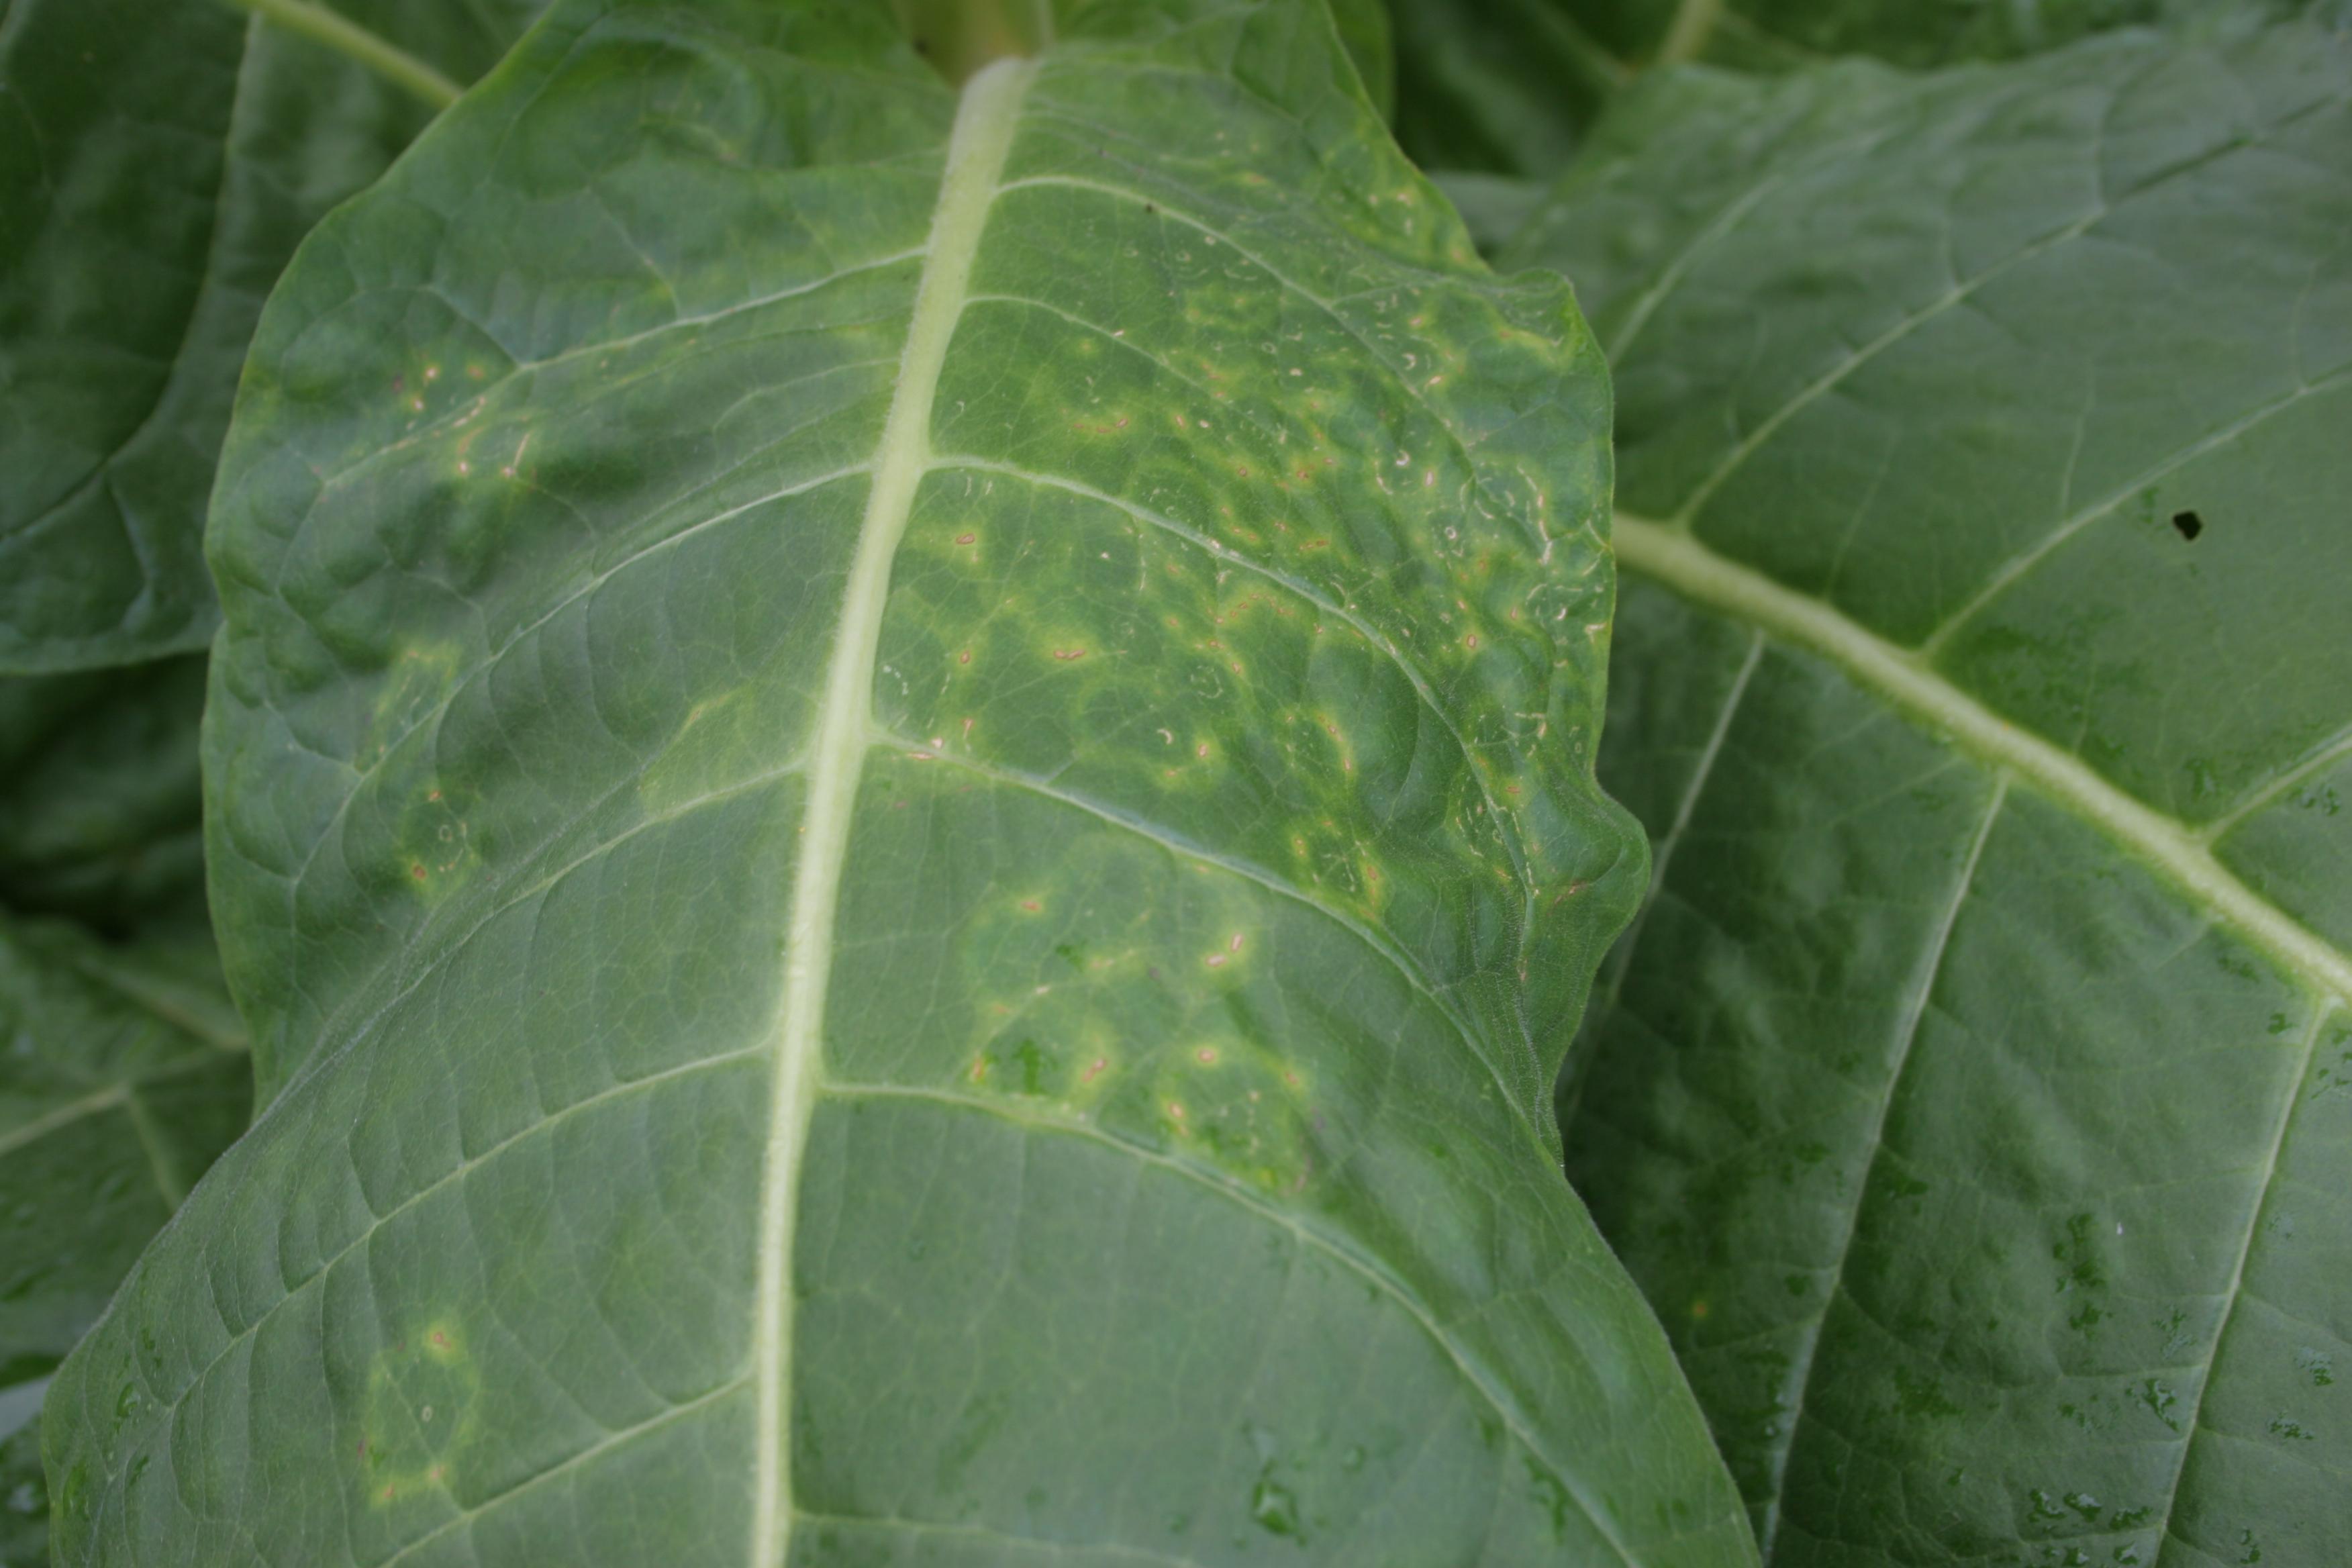 The typical chlorotic and necrotic ring symptom, as shown here, gives tobacco ringspot its name. (Photo: Kenneth Seebold, UK)